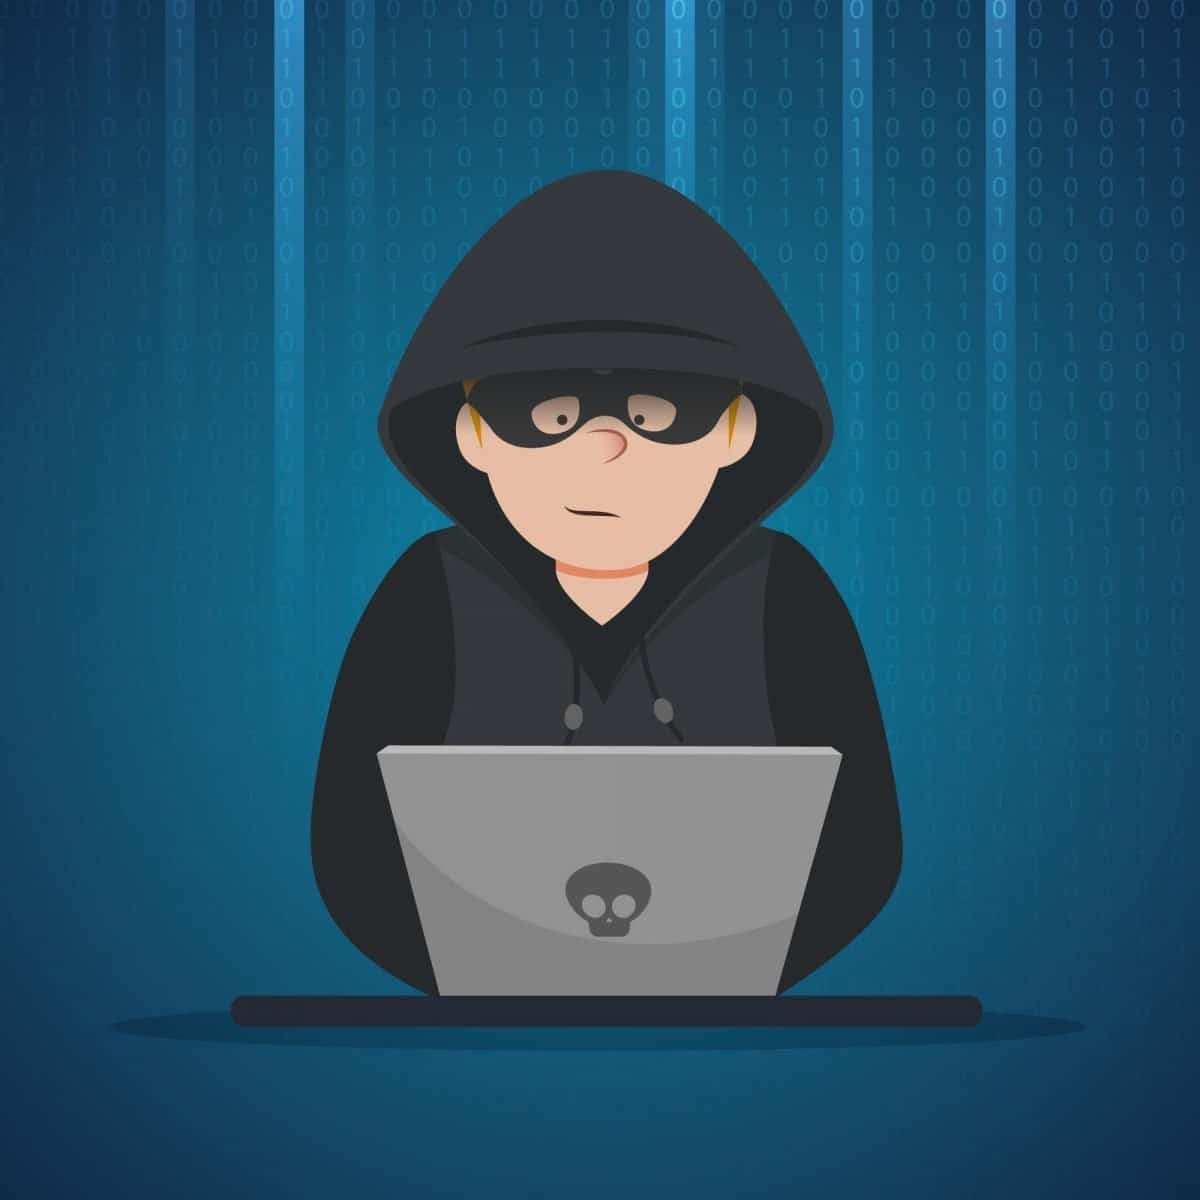 An illustration of a hacker using a laptop